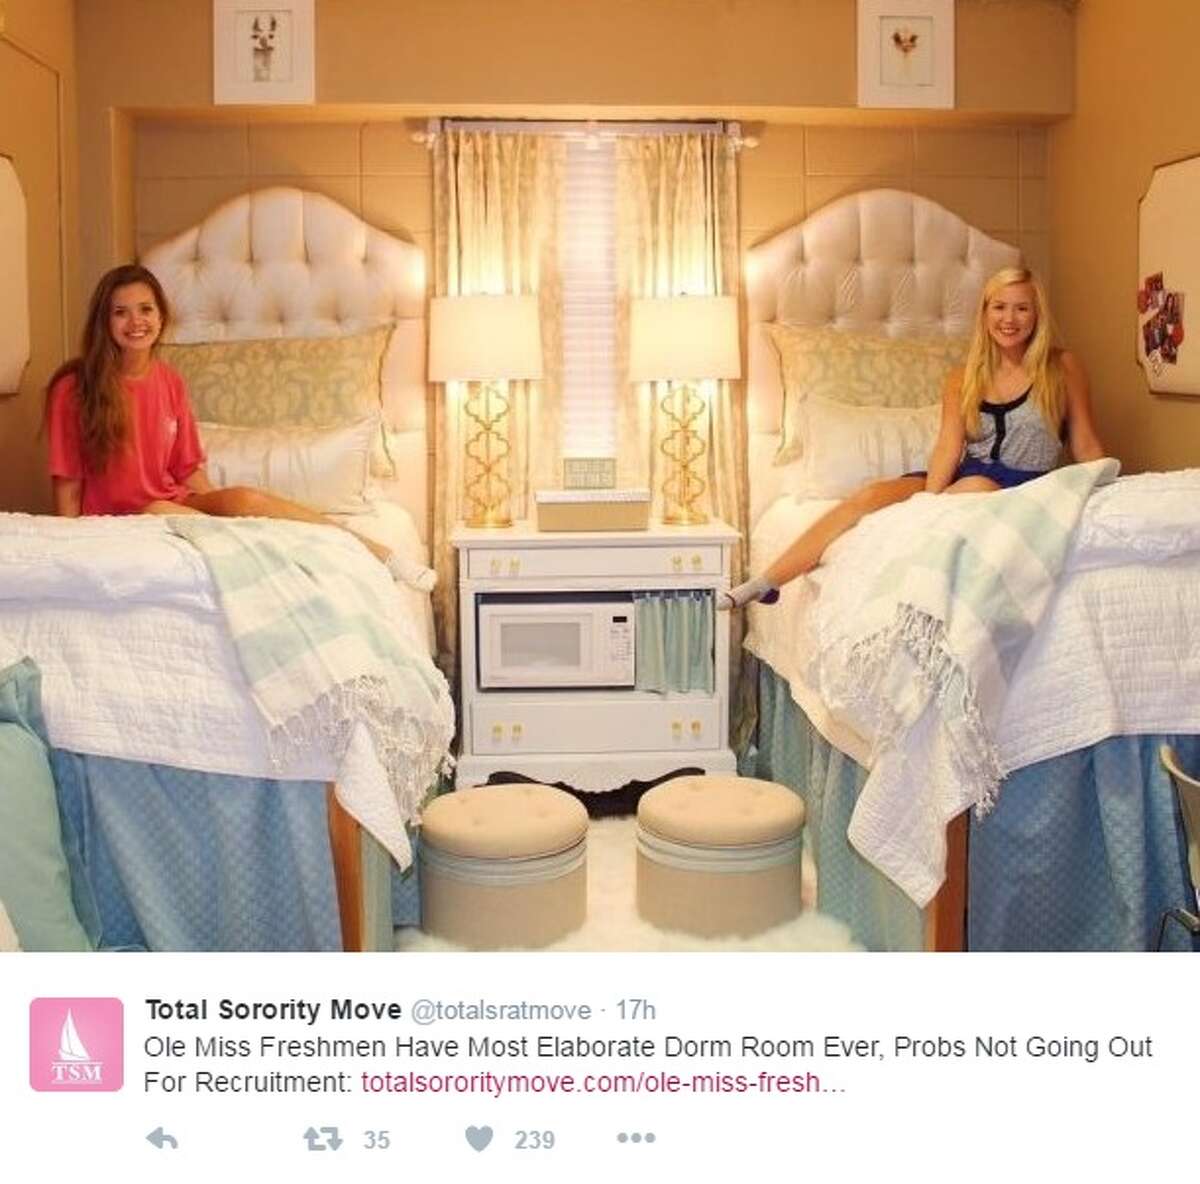 Lindy Goodson, one of the roommates living in the lavish Ole Miss dorm, has made her Twitter account private at the peak of social media fame. But, multiple media outlets and accounts have shared photos of the room.